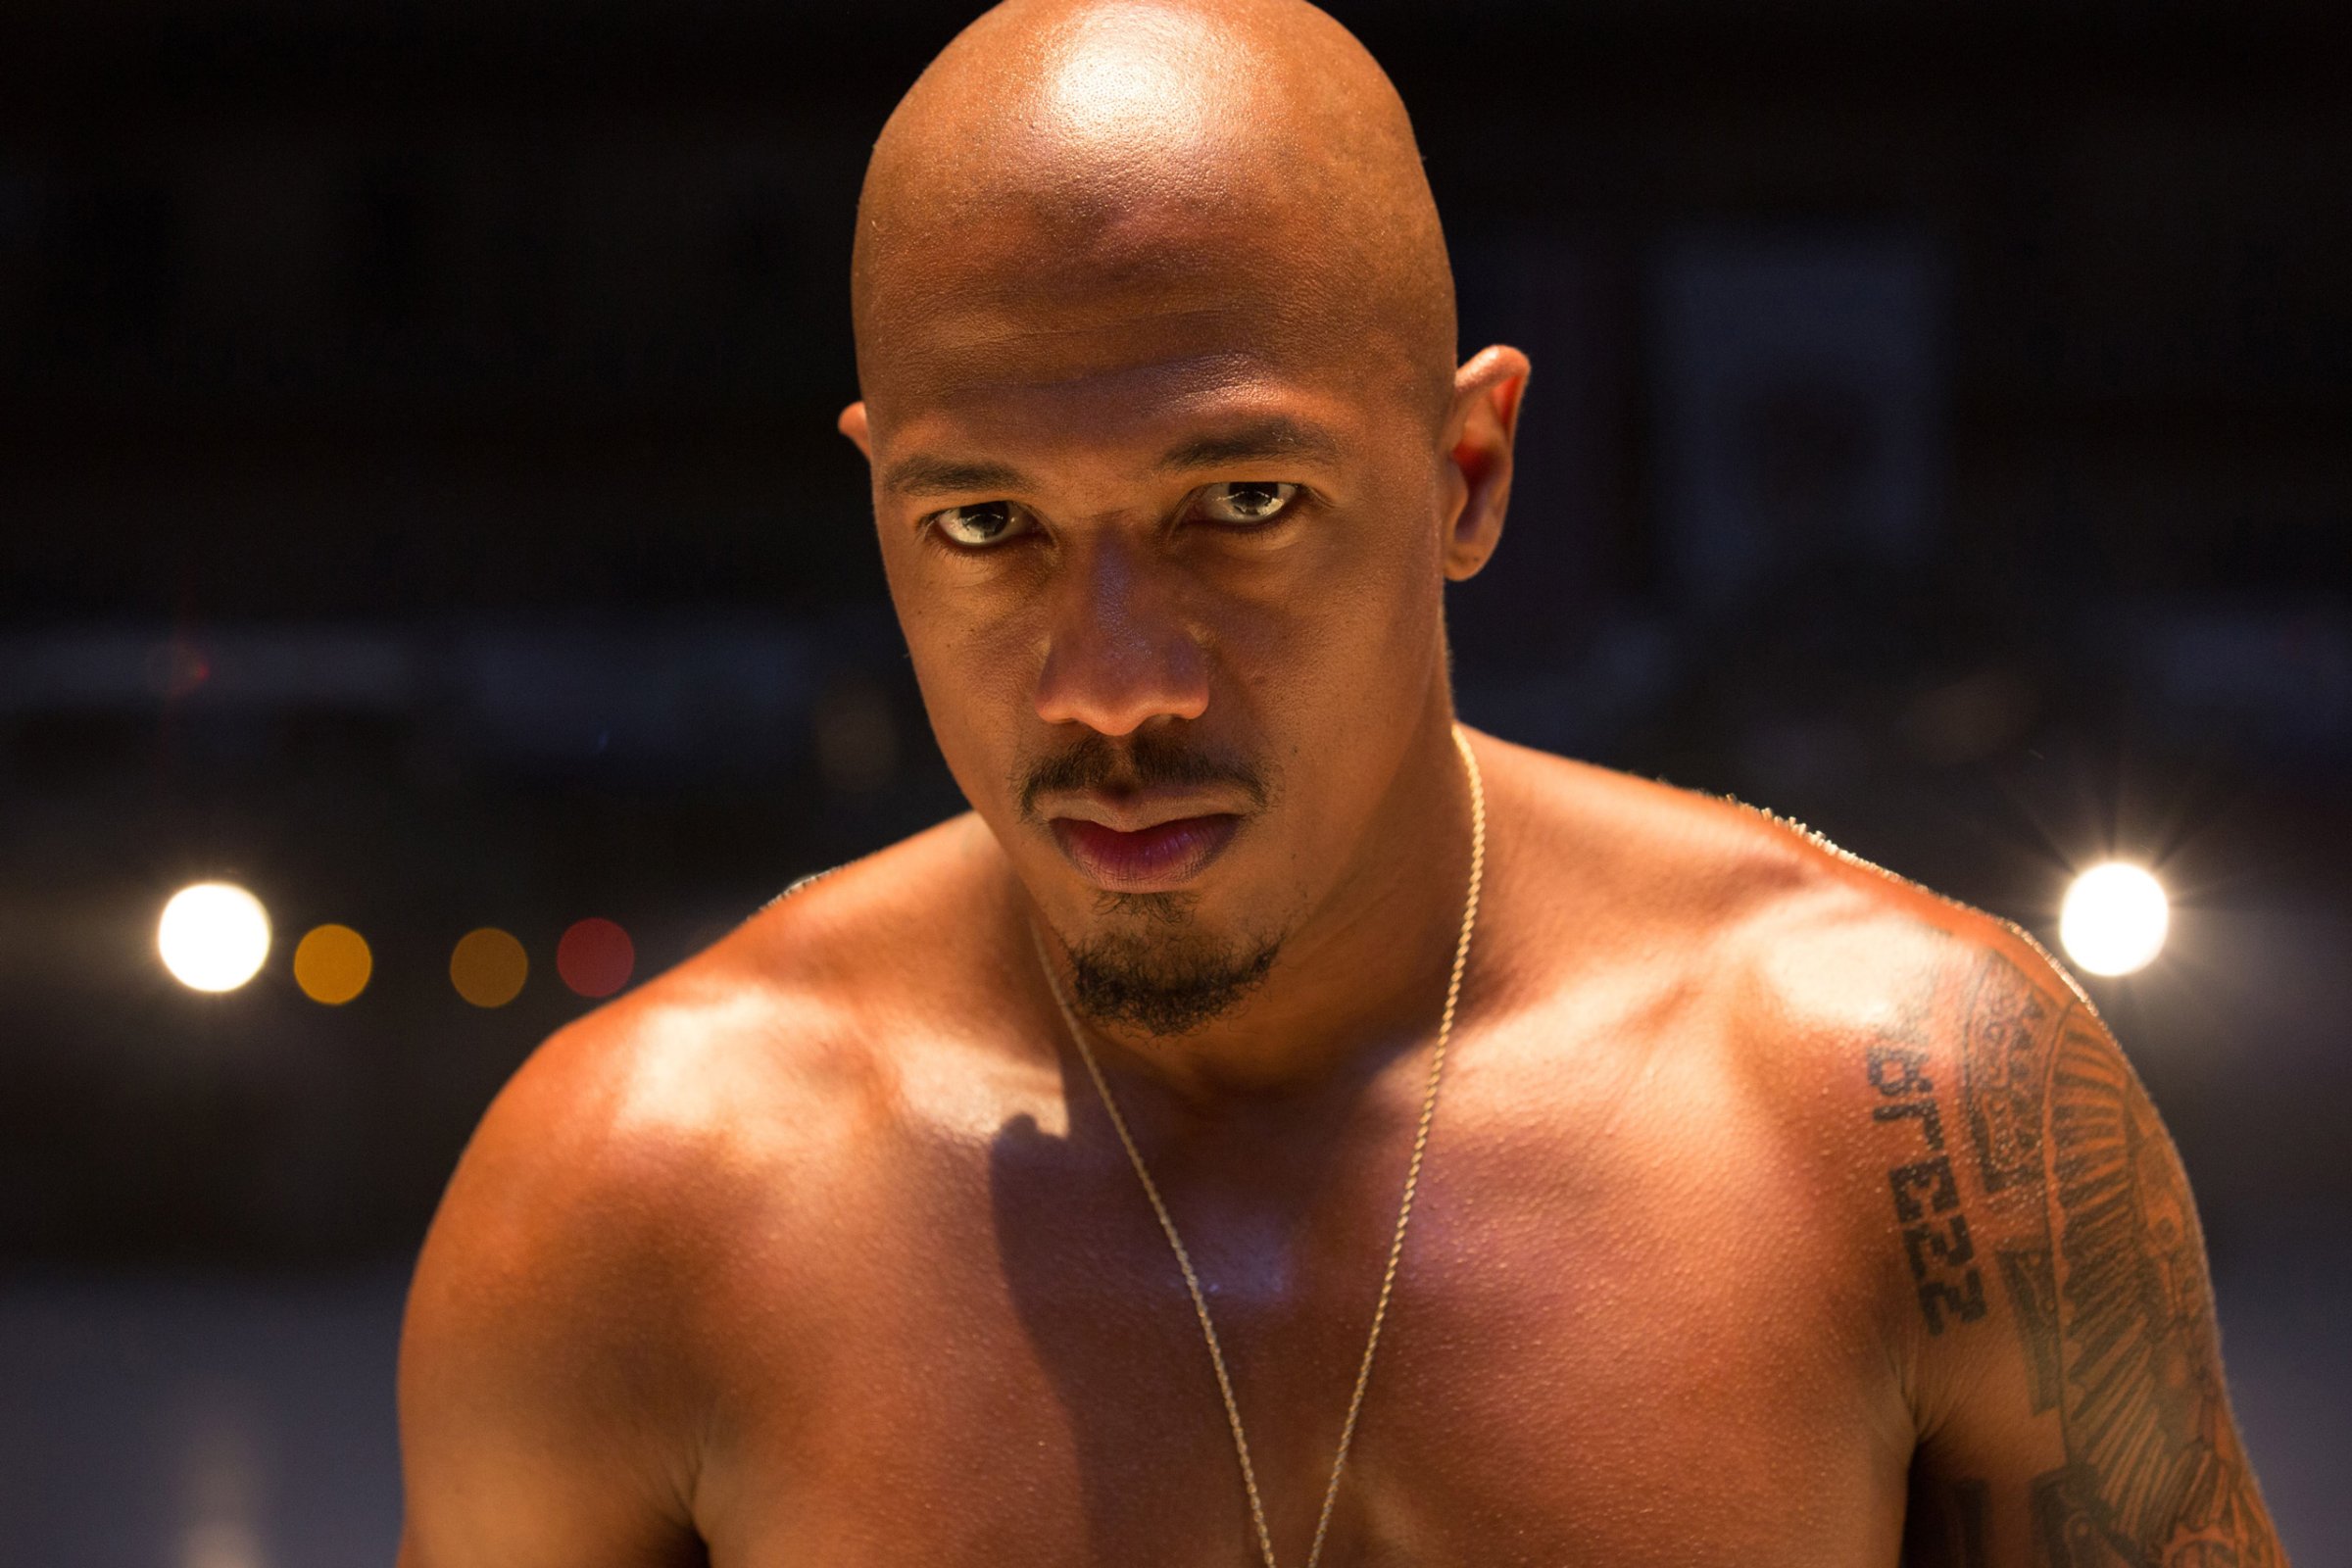 This photo provided by Roadside Attractions and Amazon Studios shows Nick Cannon as Chi-Raq in Spike Lee’s film, "Chi-Raq." The movie opens in U.S. theaters on Dec. 4, 2015. (Parrish Lewis/Roadside Attractions/Amazon Studios via AP)